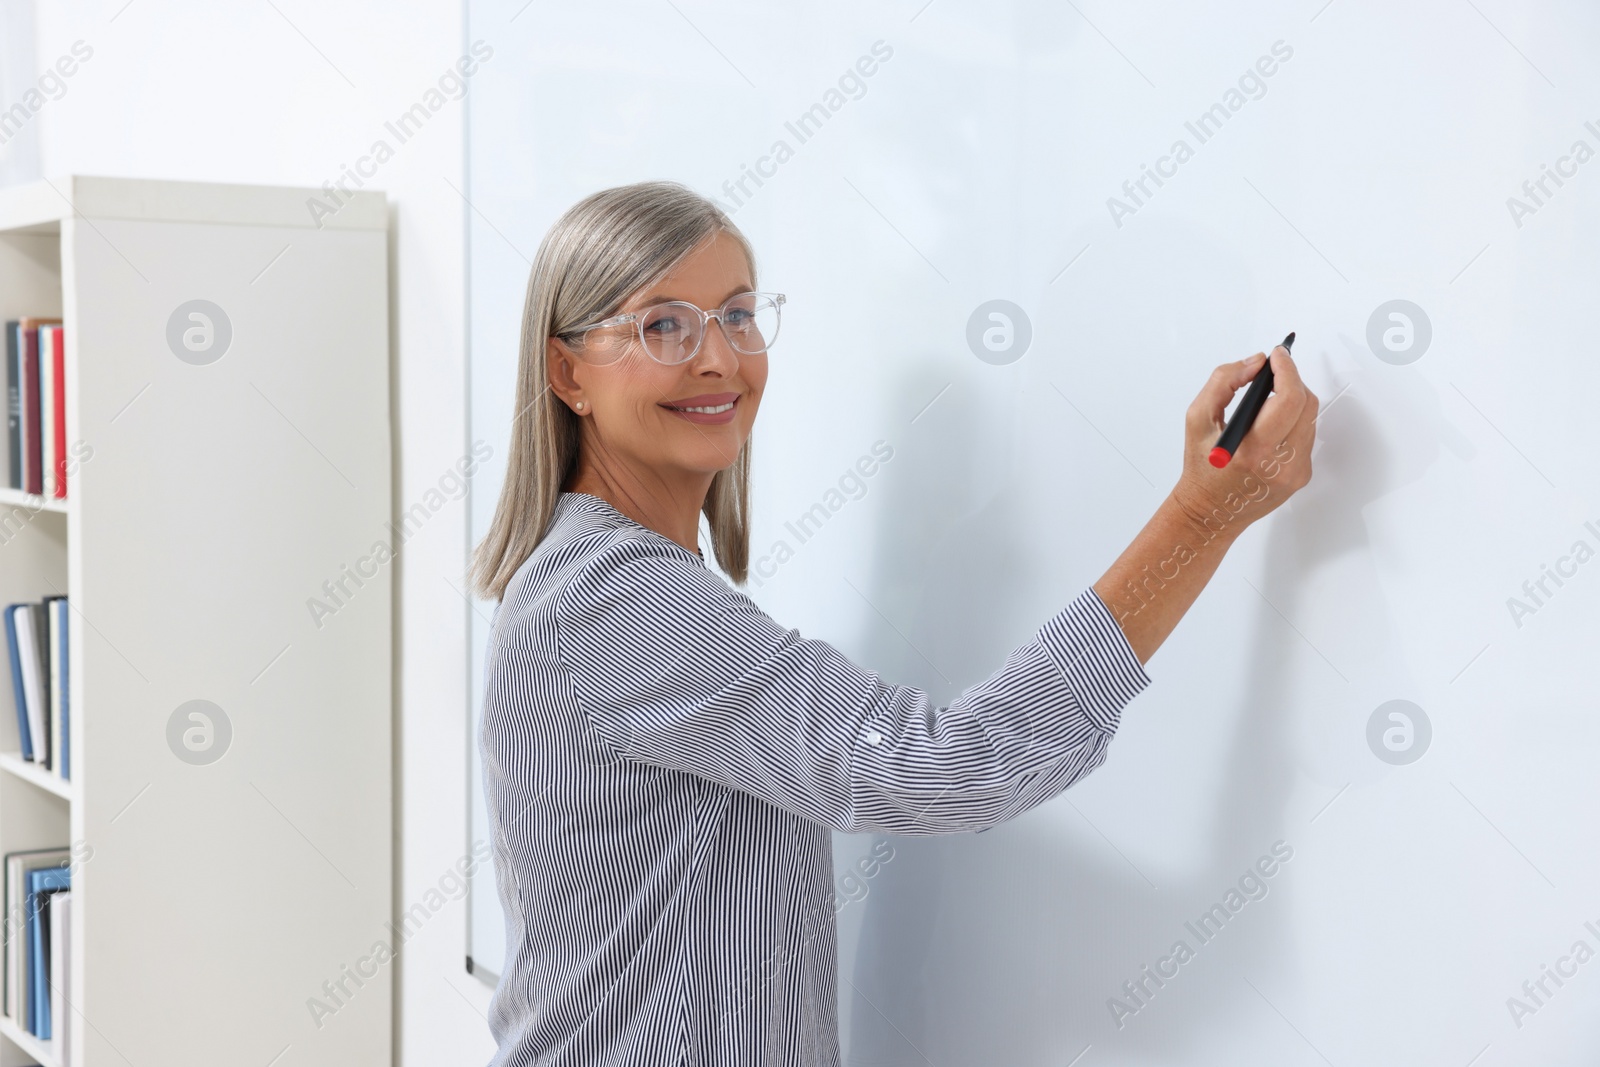 Photo of Professor explaining something with marker at whiteboard in classroom